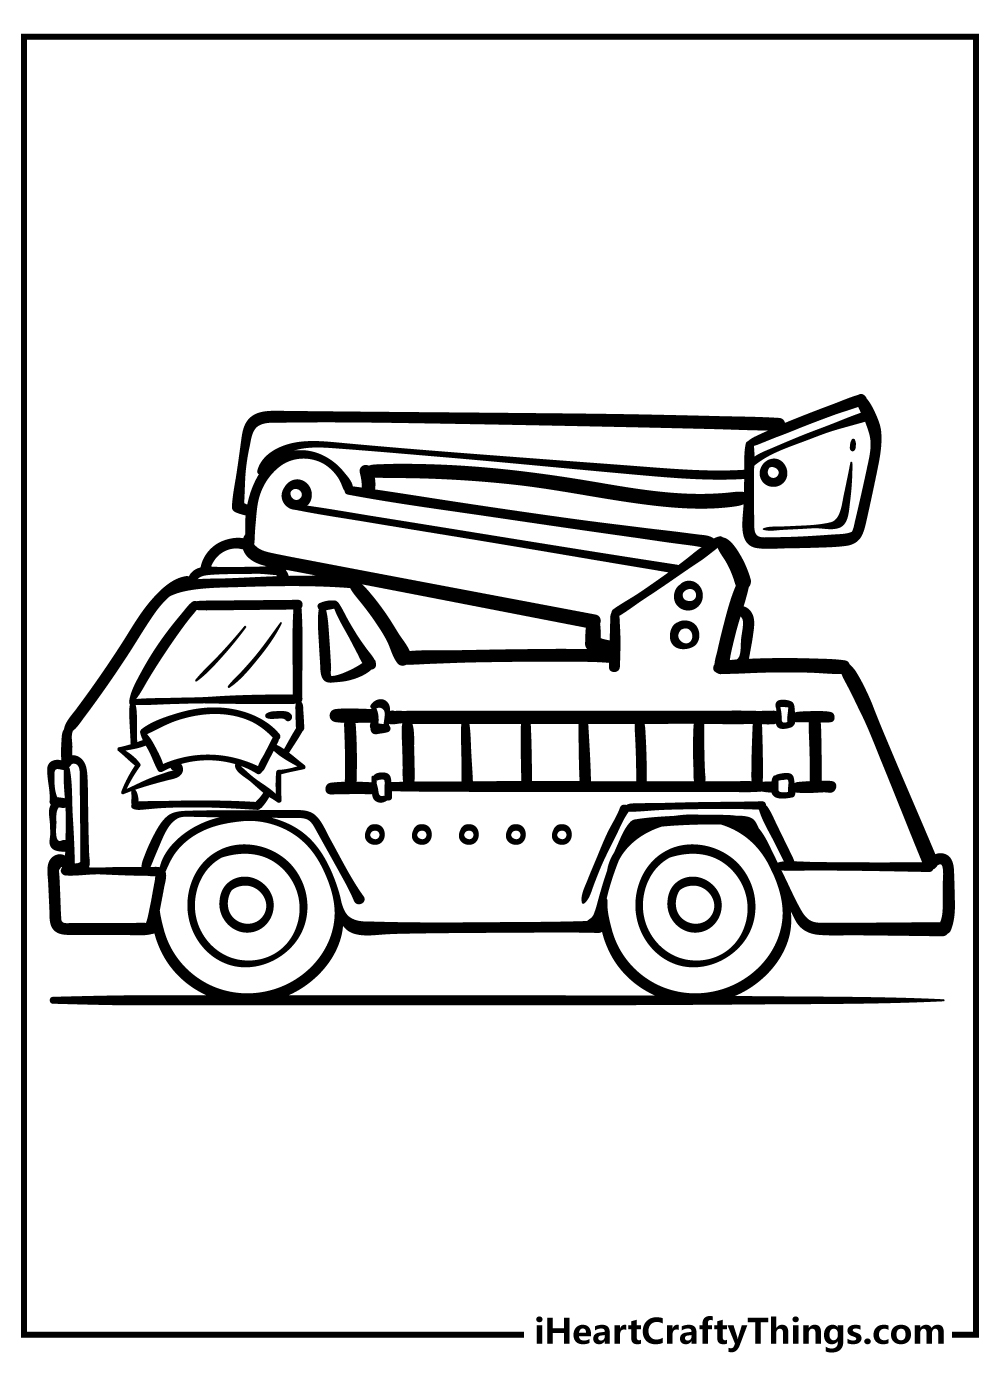 Fire Truck Coloring Book for kids free printable